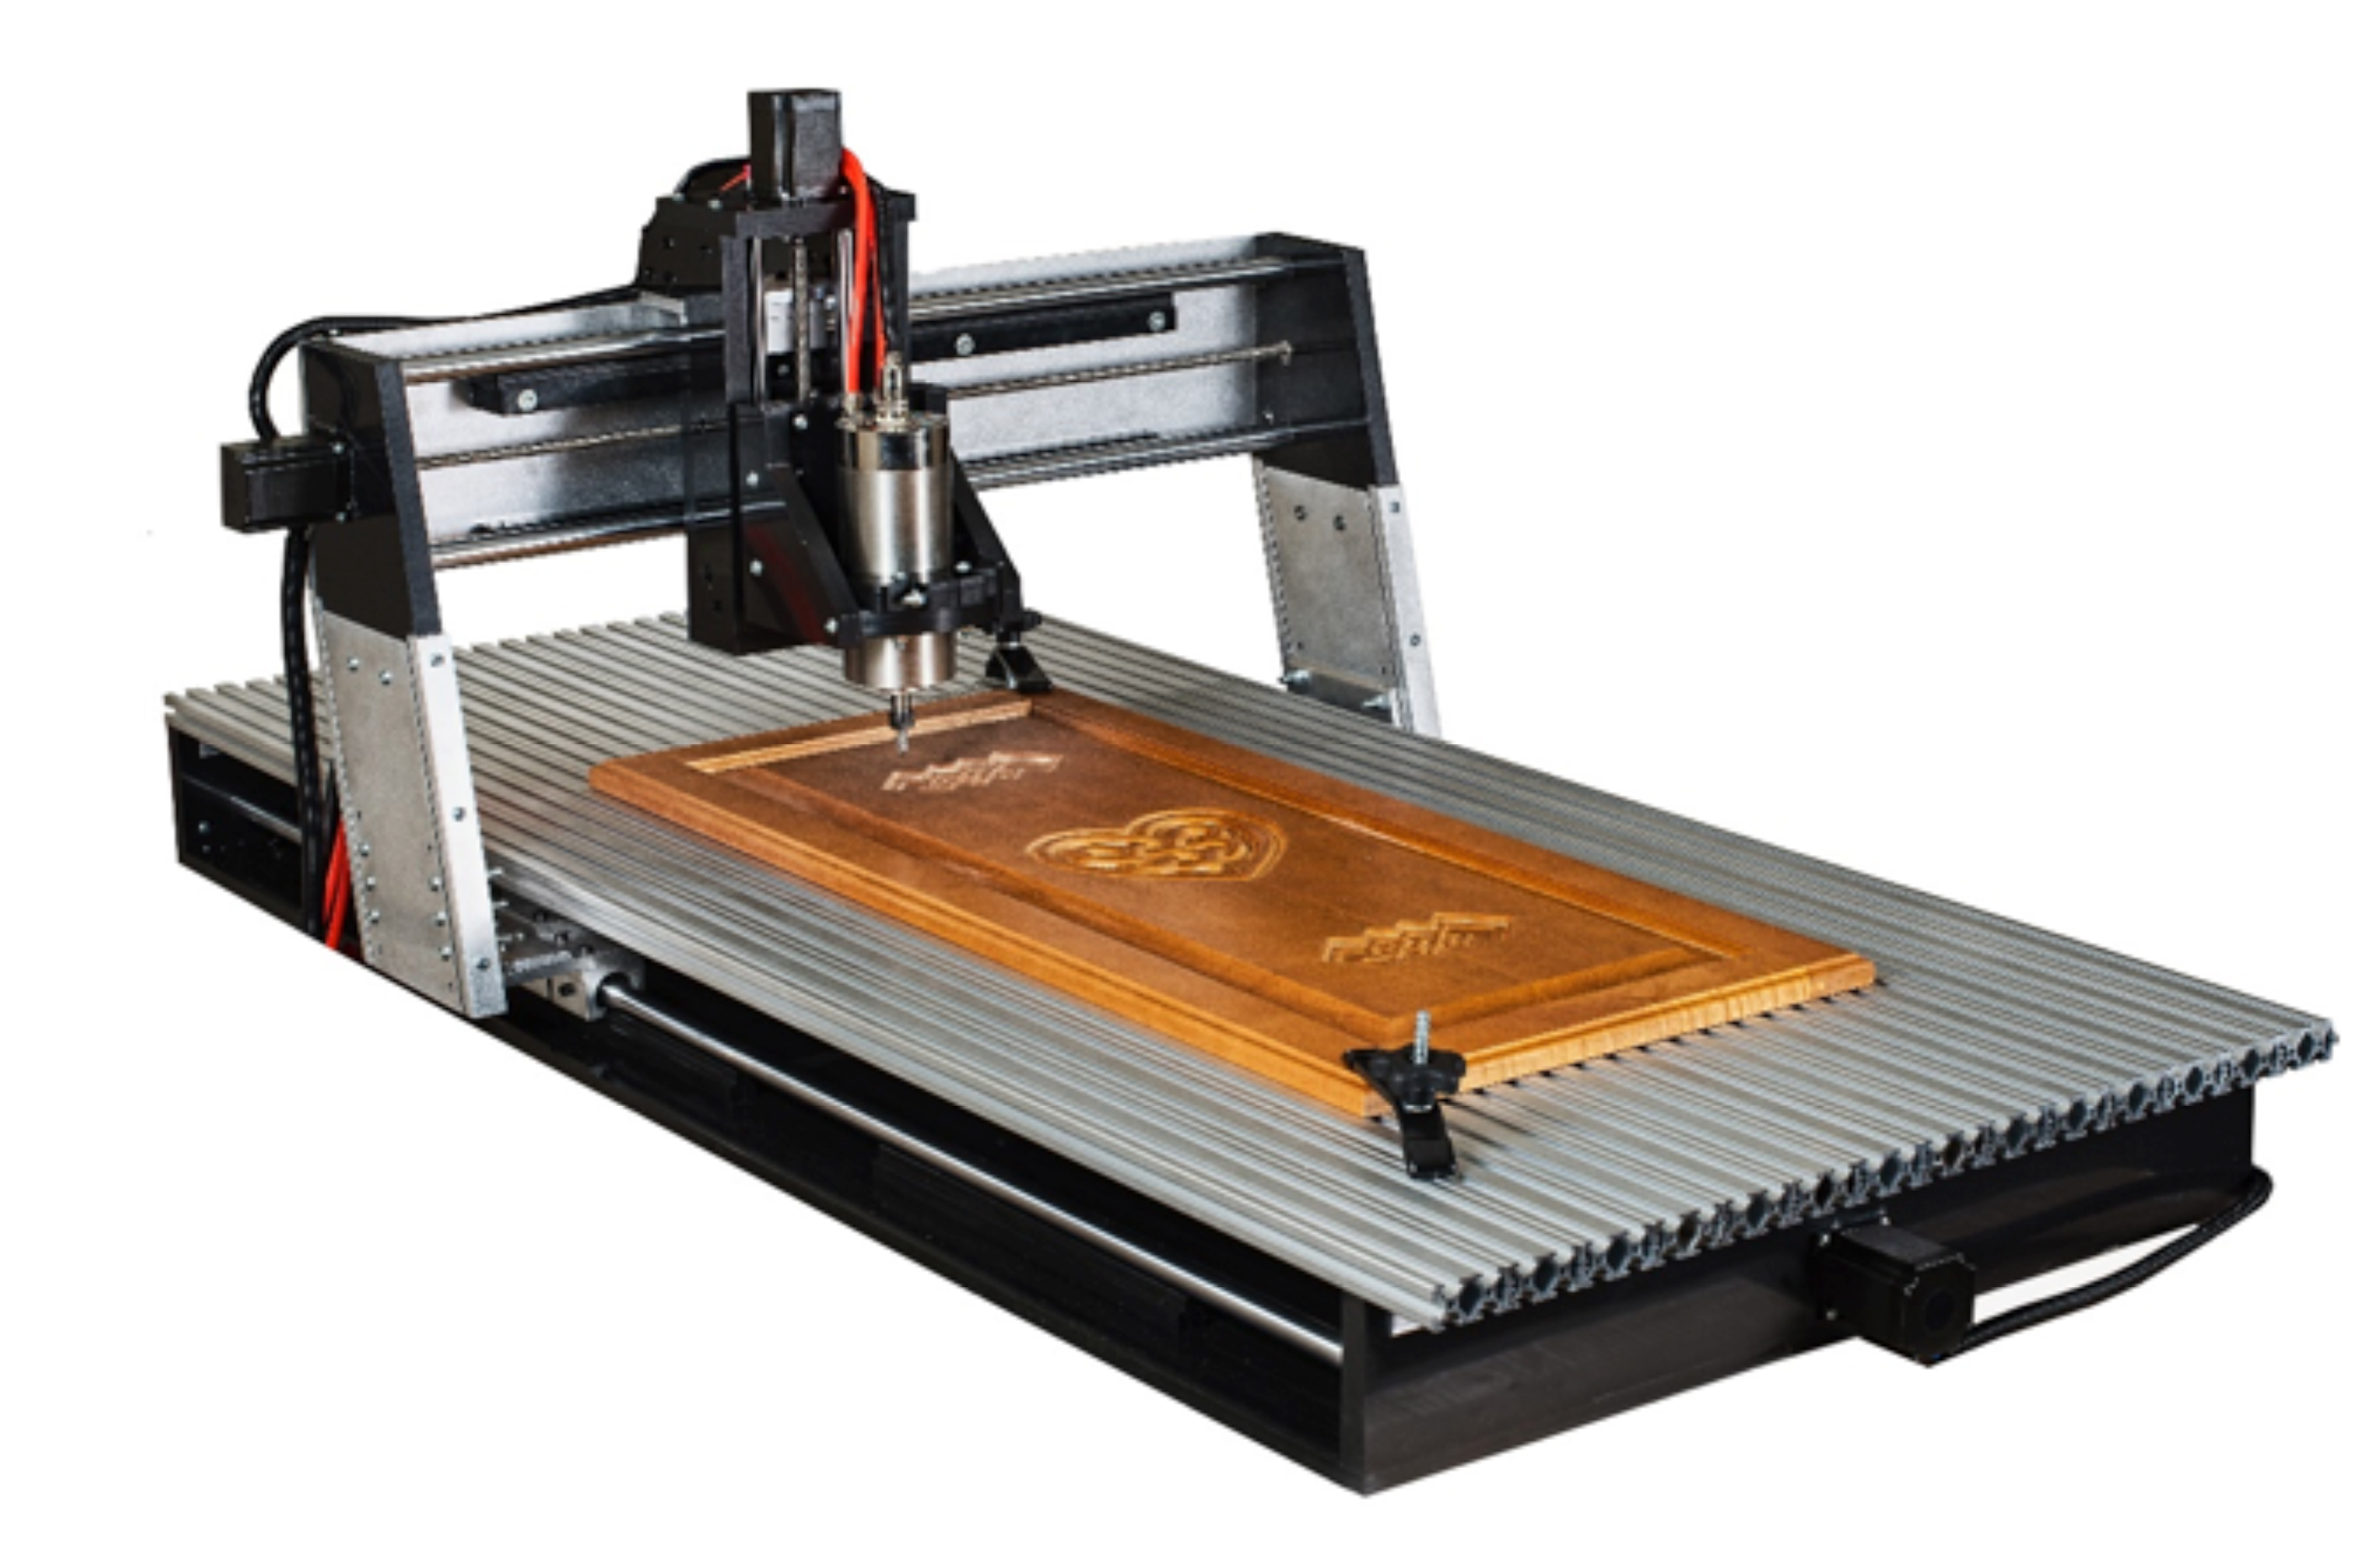 CNC router with small footprint | Woodworking Network